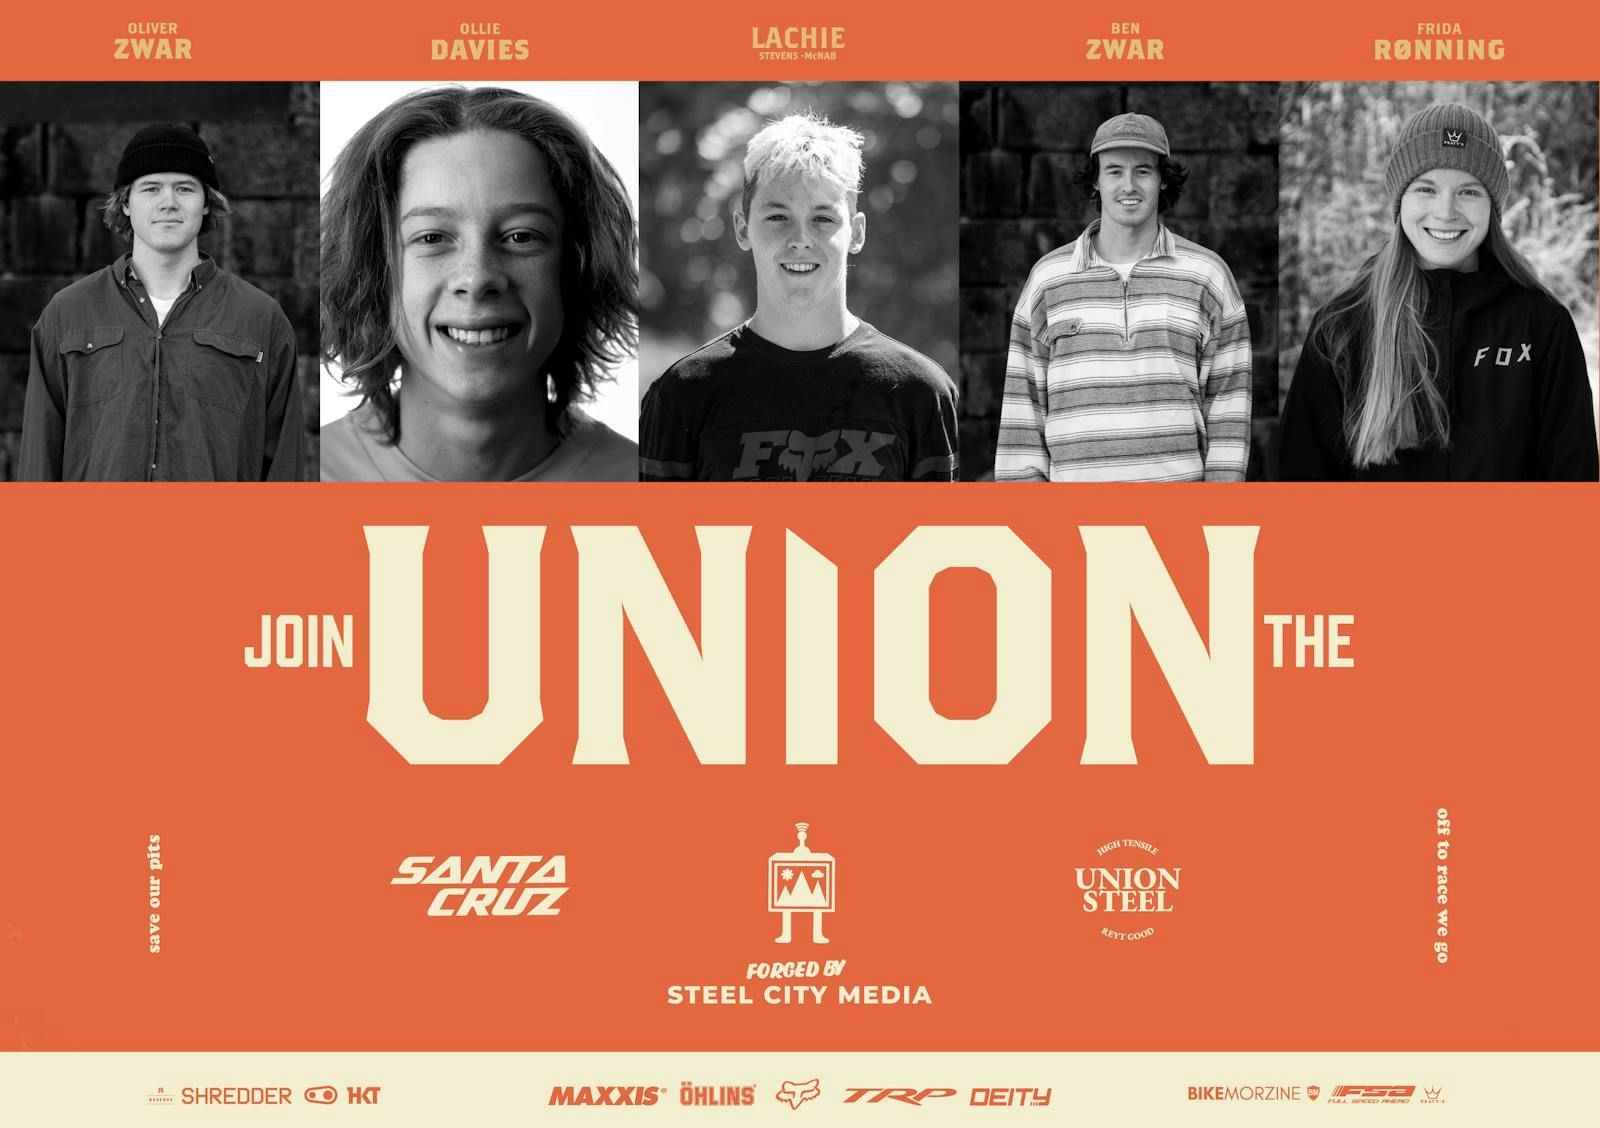 The 2022 Union Team Poster